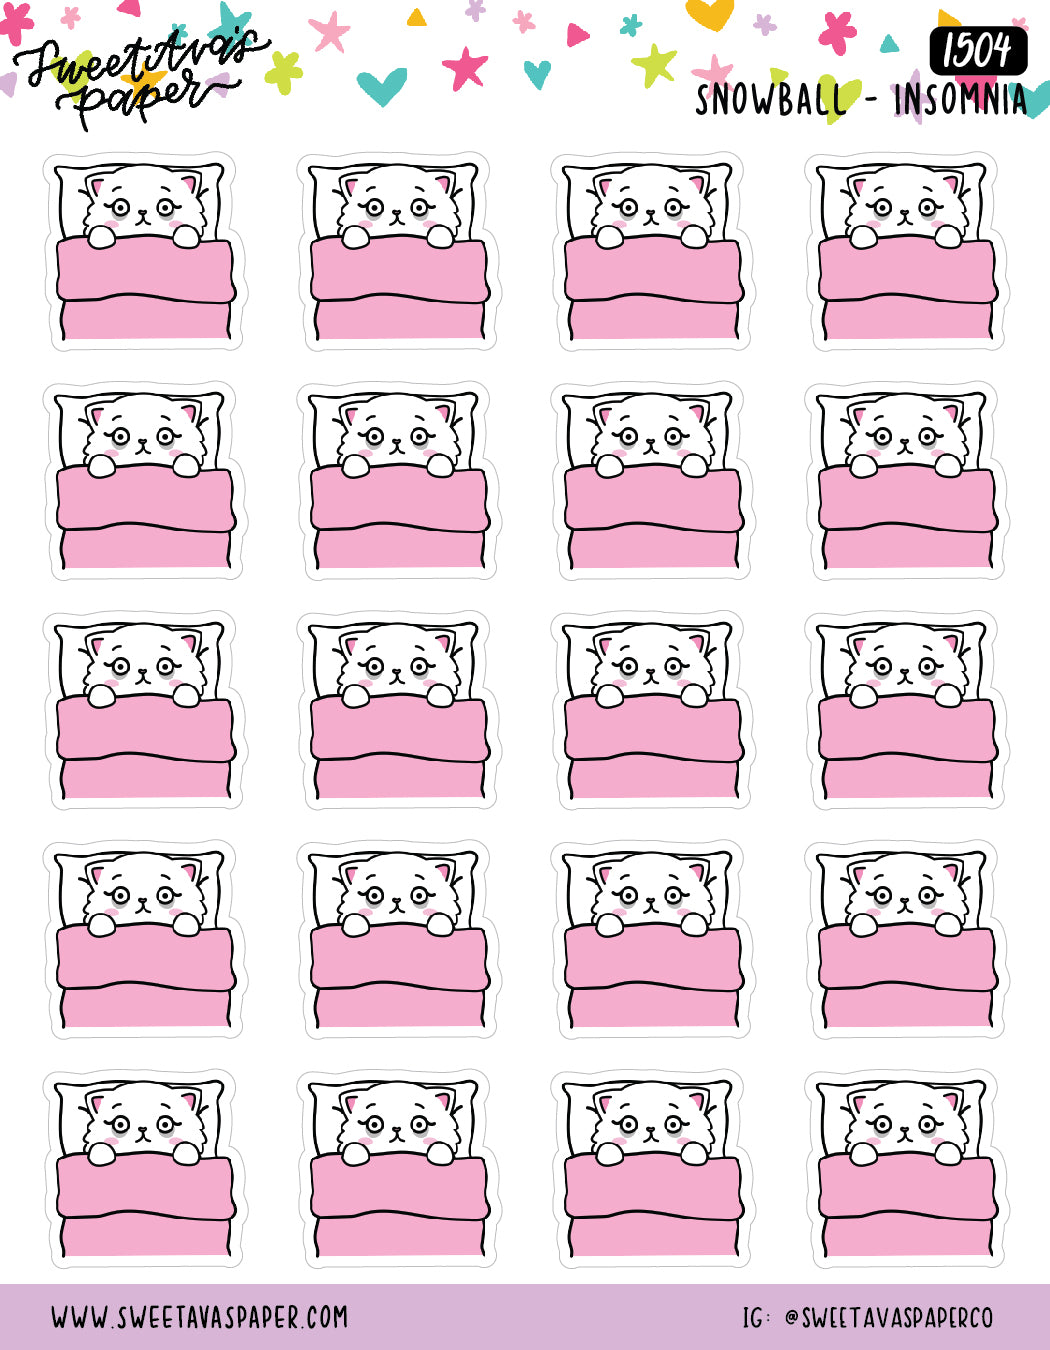 Can't Sleep Planner Stickers - Snowball The Cat [1504]